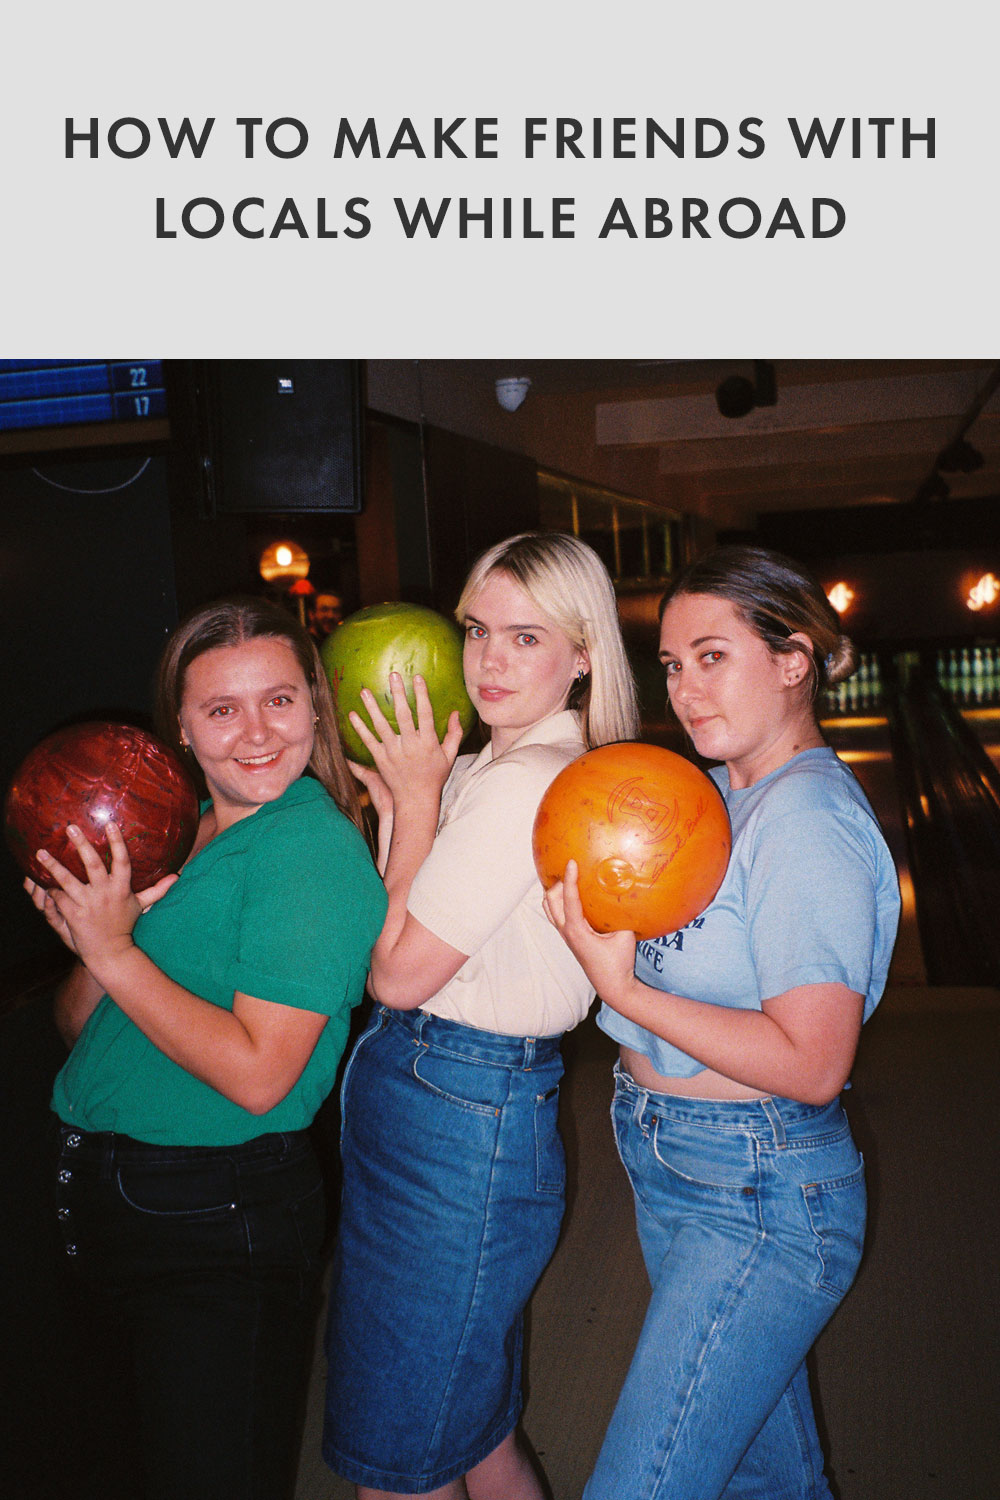 Three friends smiling and holding bowling balls